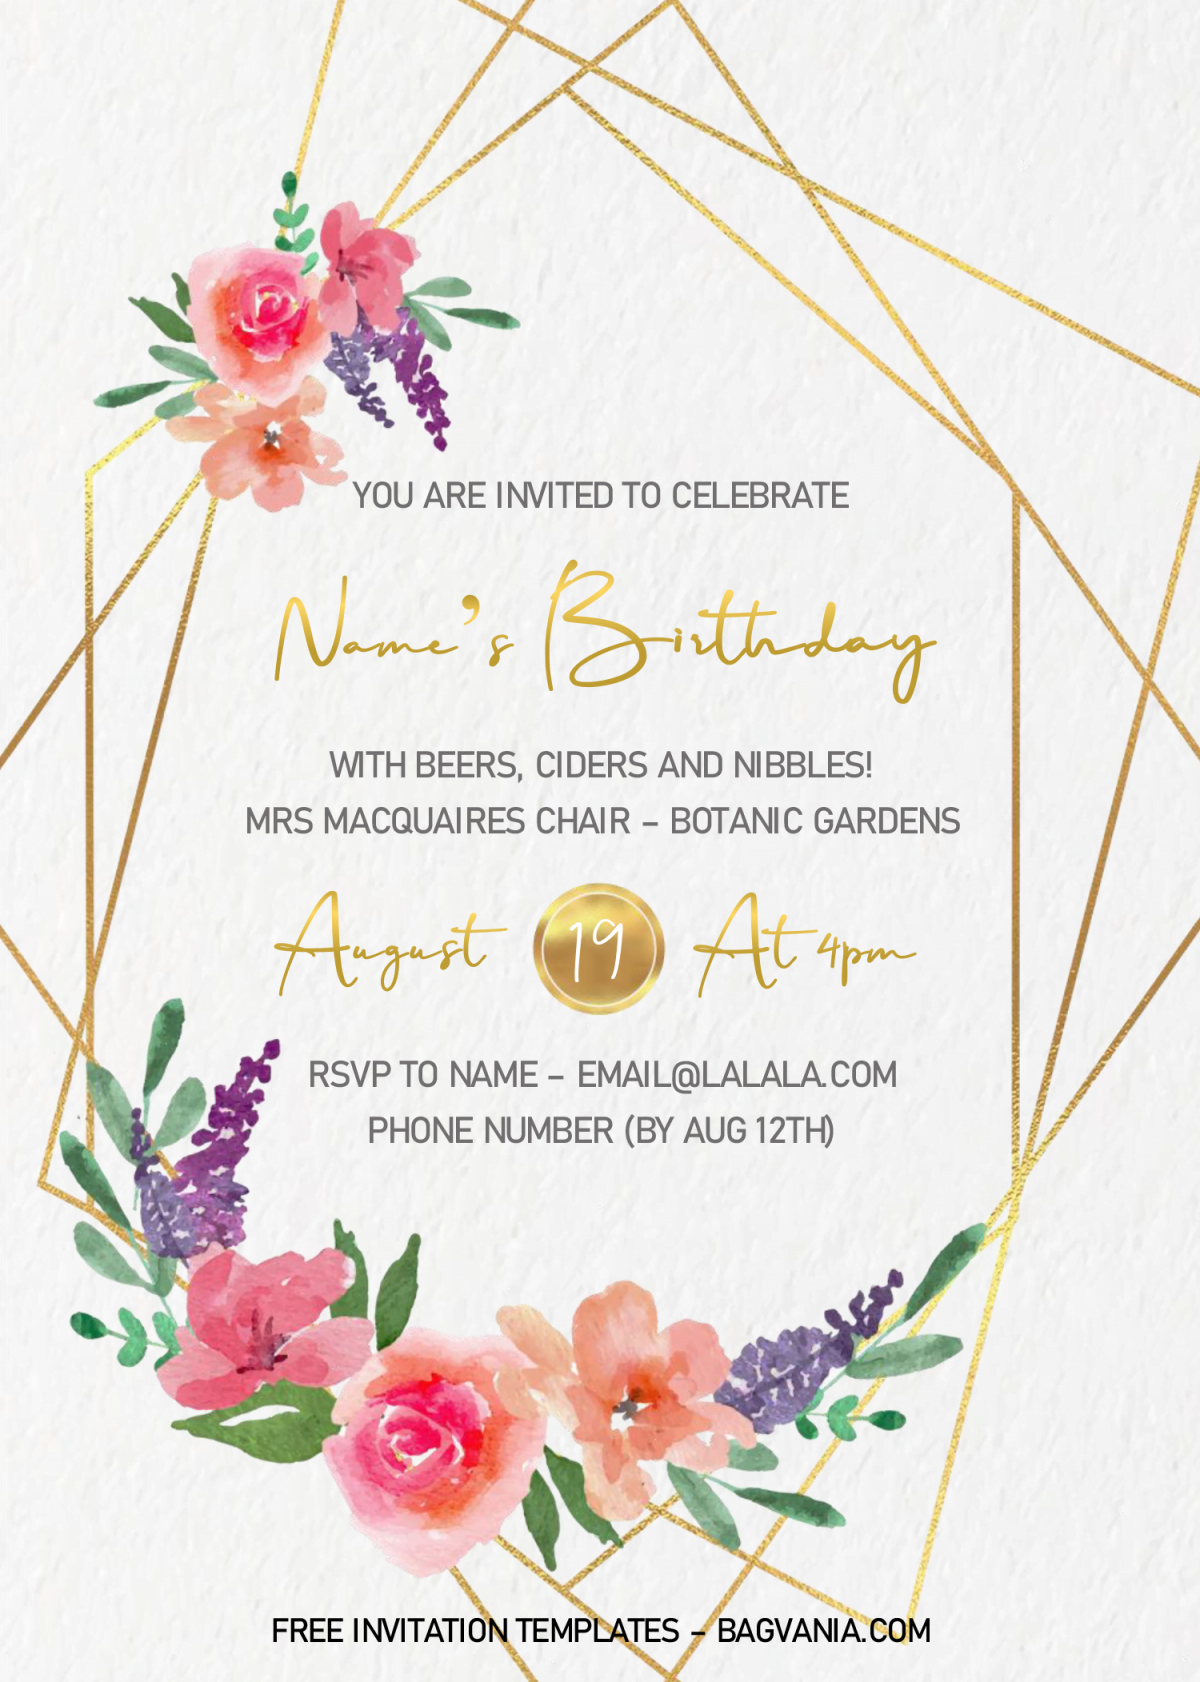 Gold Geometric Invitation Templates - Editable .Docx and has watercolor floral